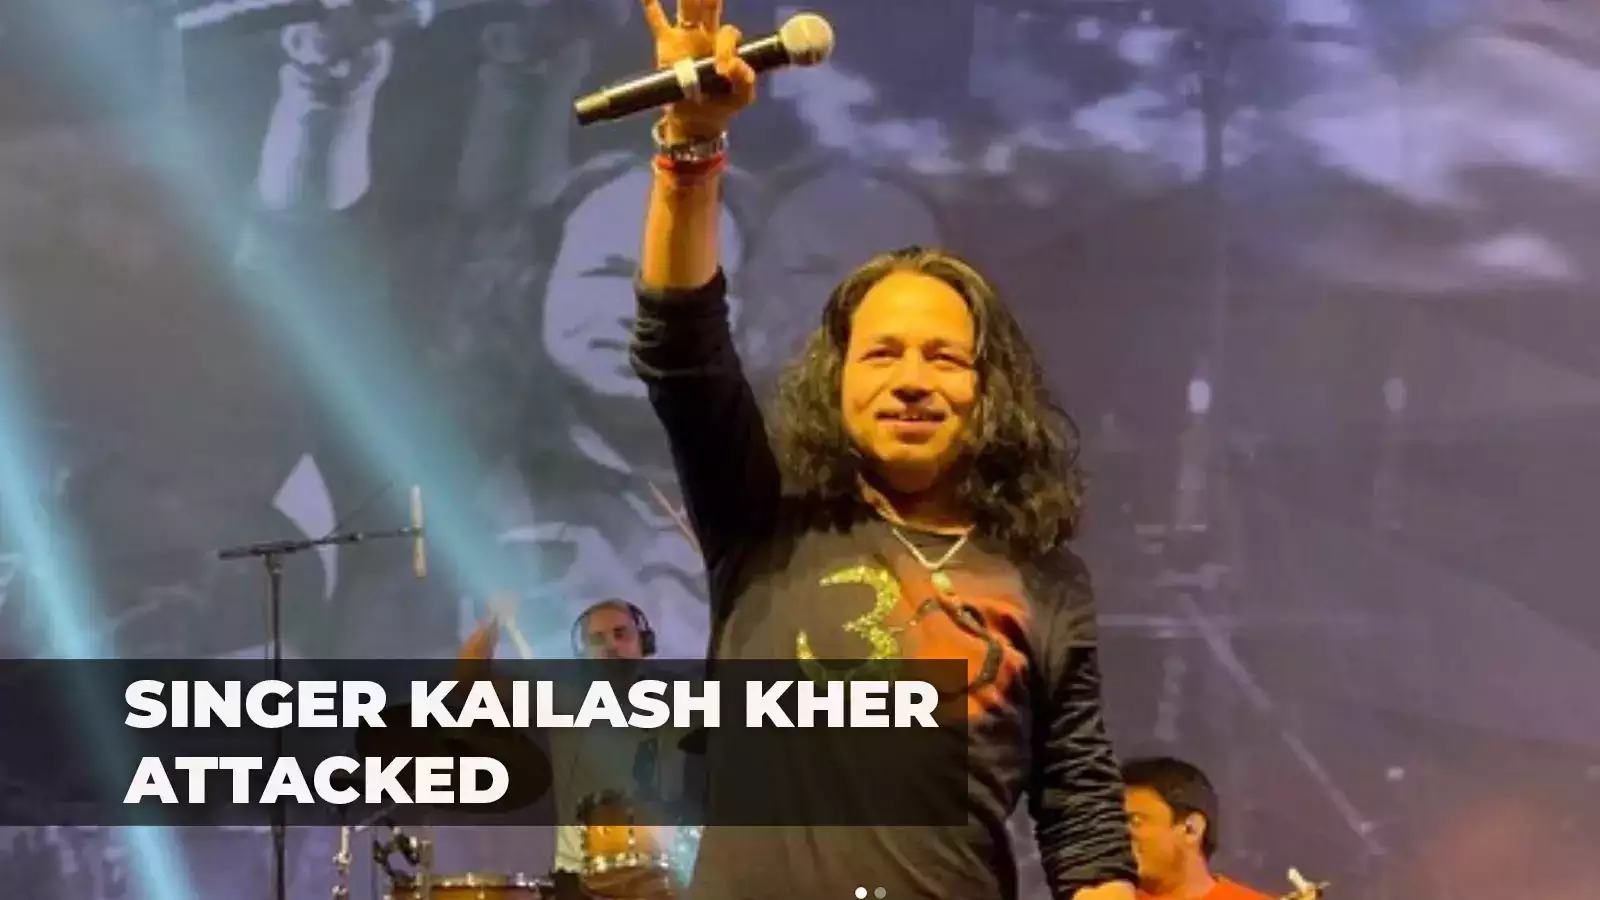 Kailash Kher was Attacked During the program, Two People Arrested - Check Details and Videos